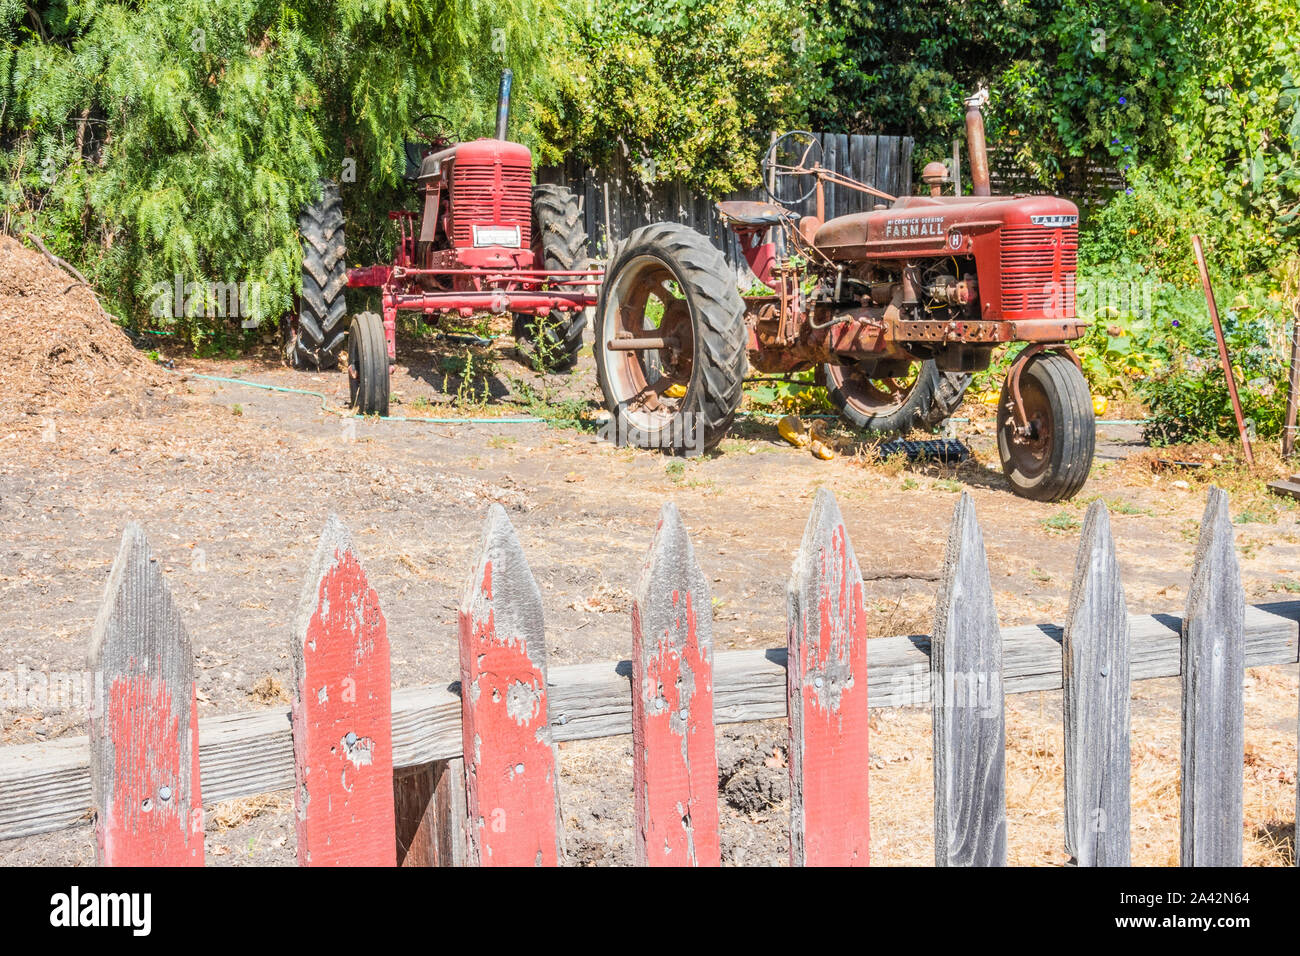 Two old red tractors parked with a weathered red wooden picket fence in the foreground in Los Olivos, California. Stock Photo